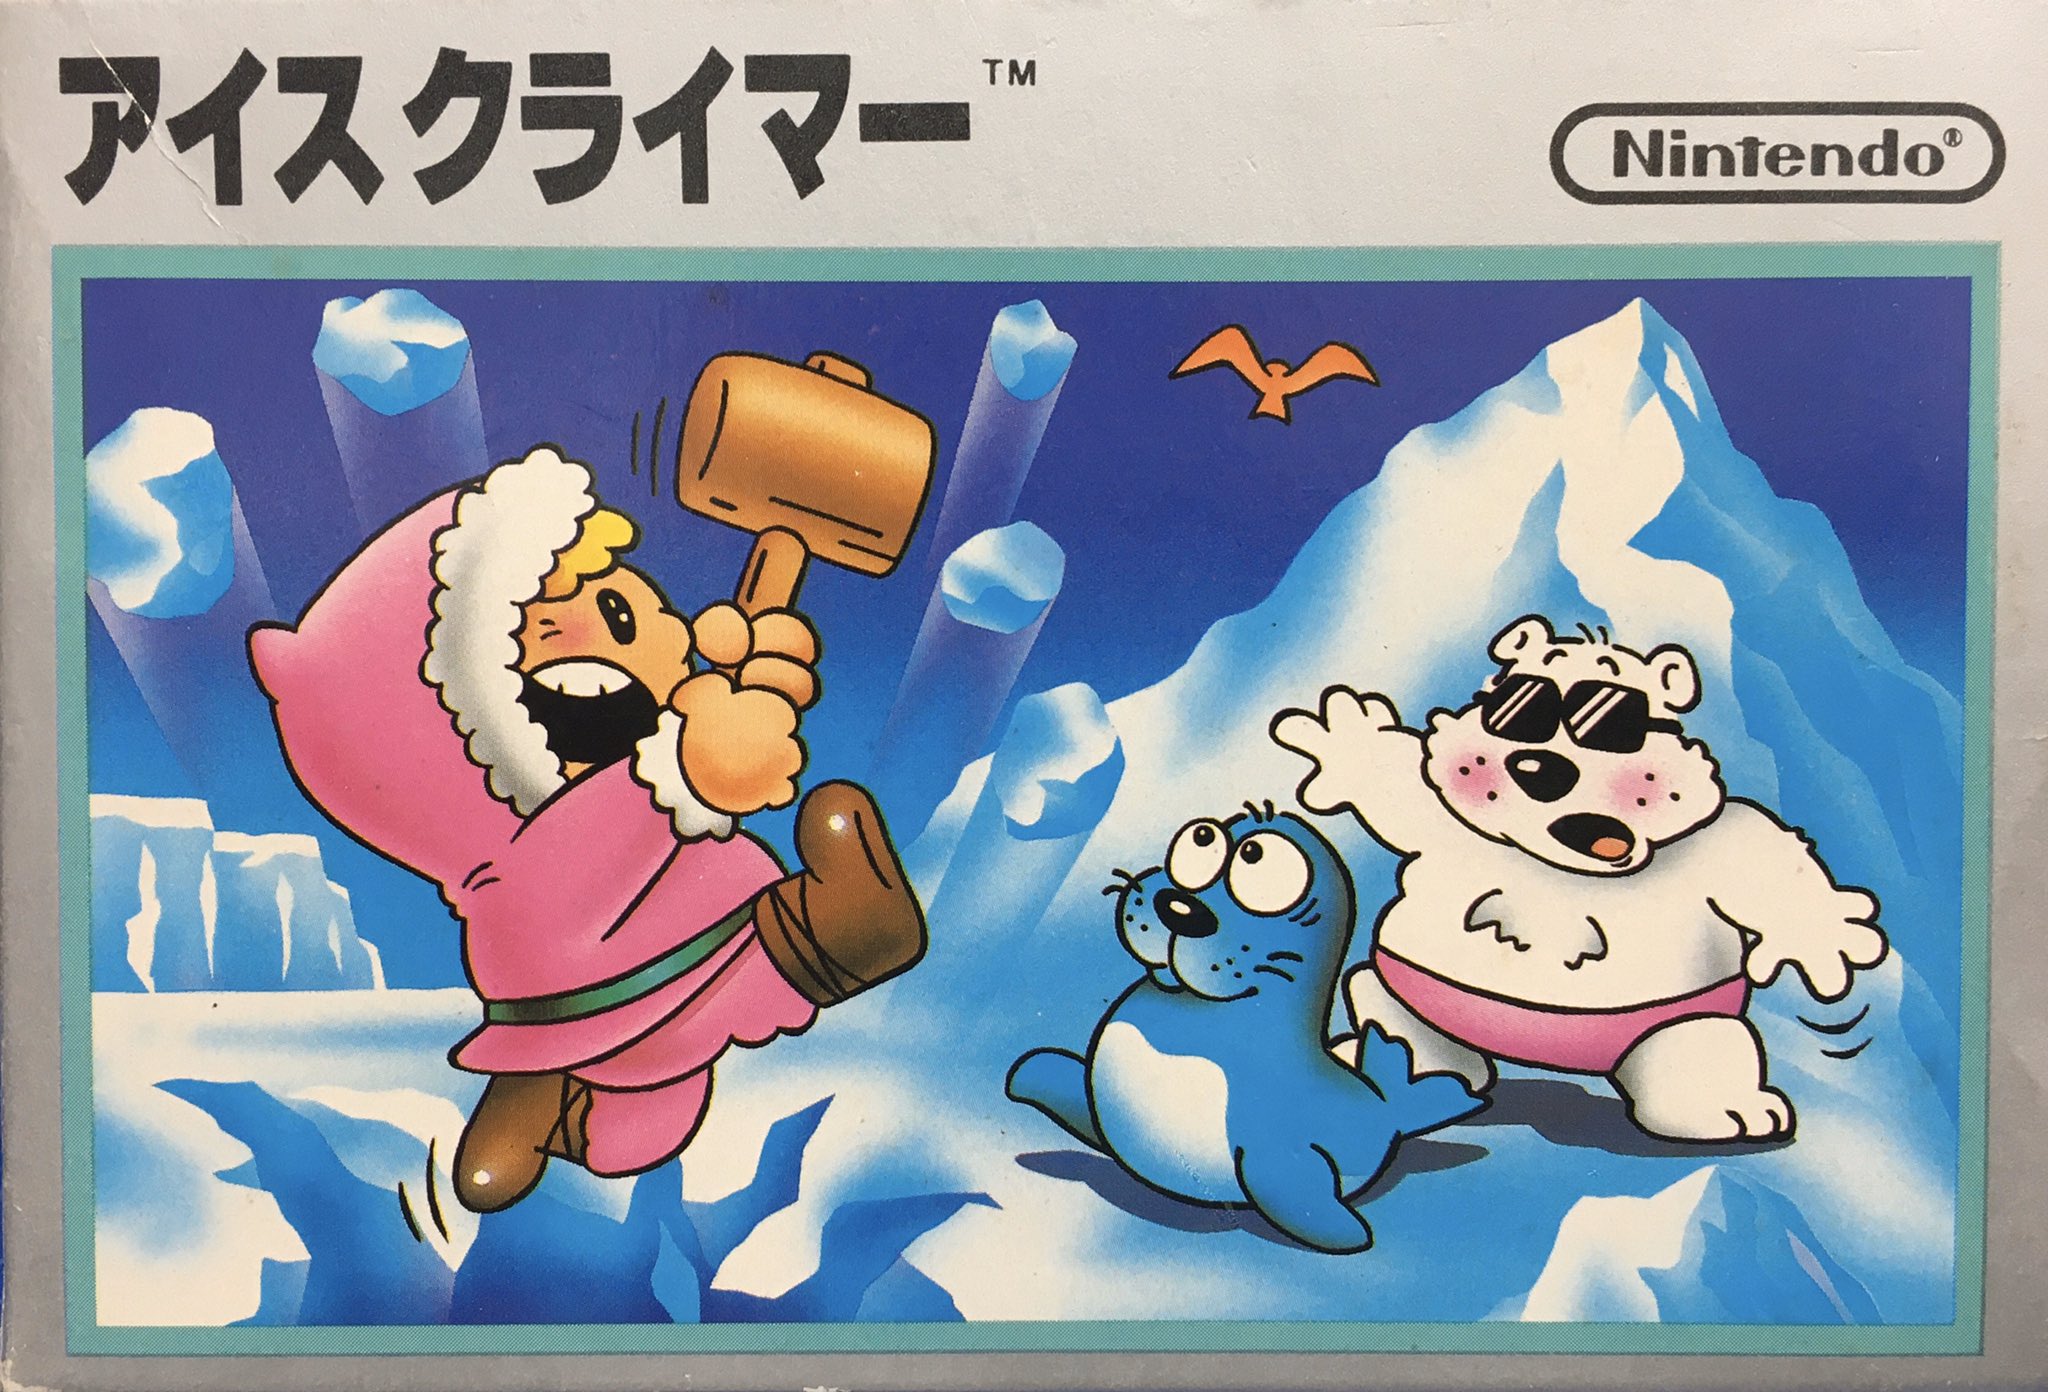 ice climber the game